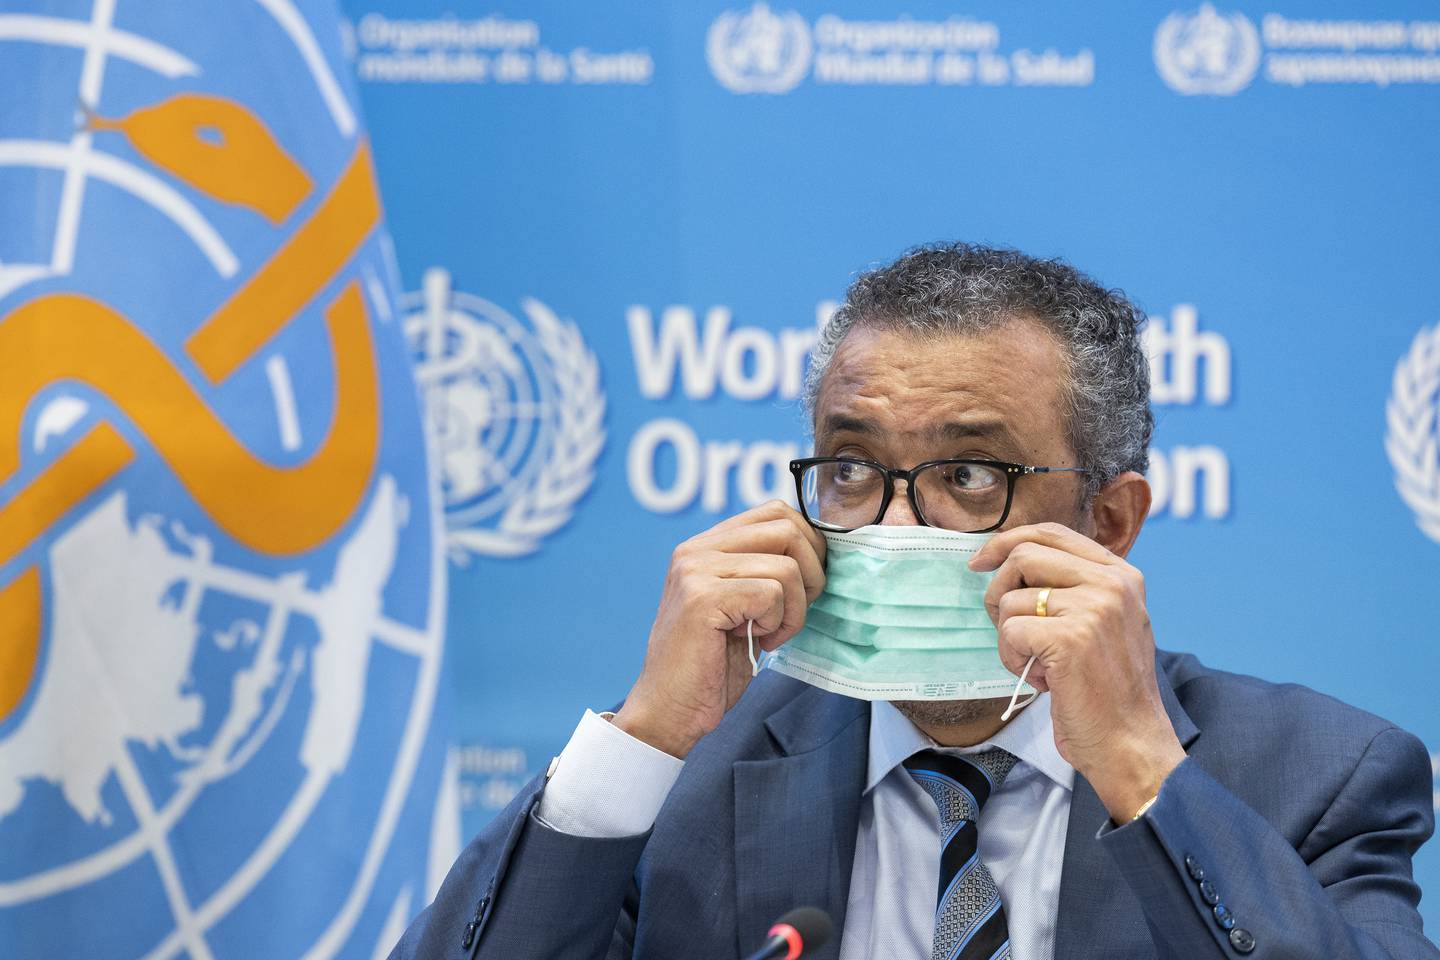 Tedros Adhanom Ghebreyesus, Director General of the World Health Organization (WHO), removes his protective face mask prior to speaking to the media regarding the coronavirus COVID-19 and WHO's global health priorities in 2022, during a new press conference, at the World Health Organization (WHO) headquarters in Geneva, Switzerland, Monday, Dec.  20, 2021. (Salvatore Di Nolfi/Keystone via AP)